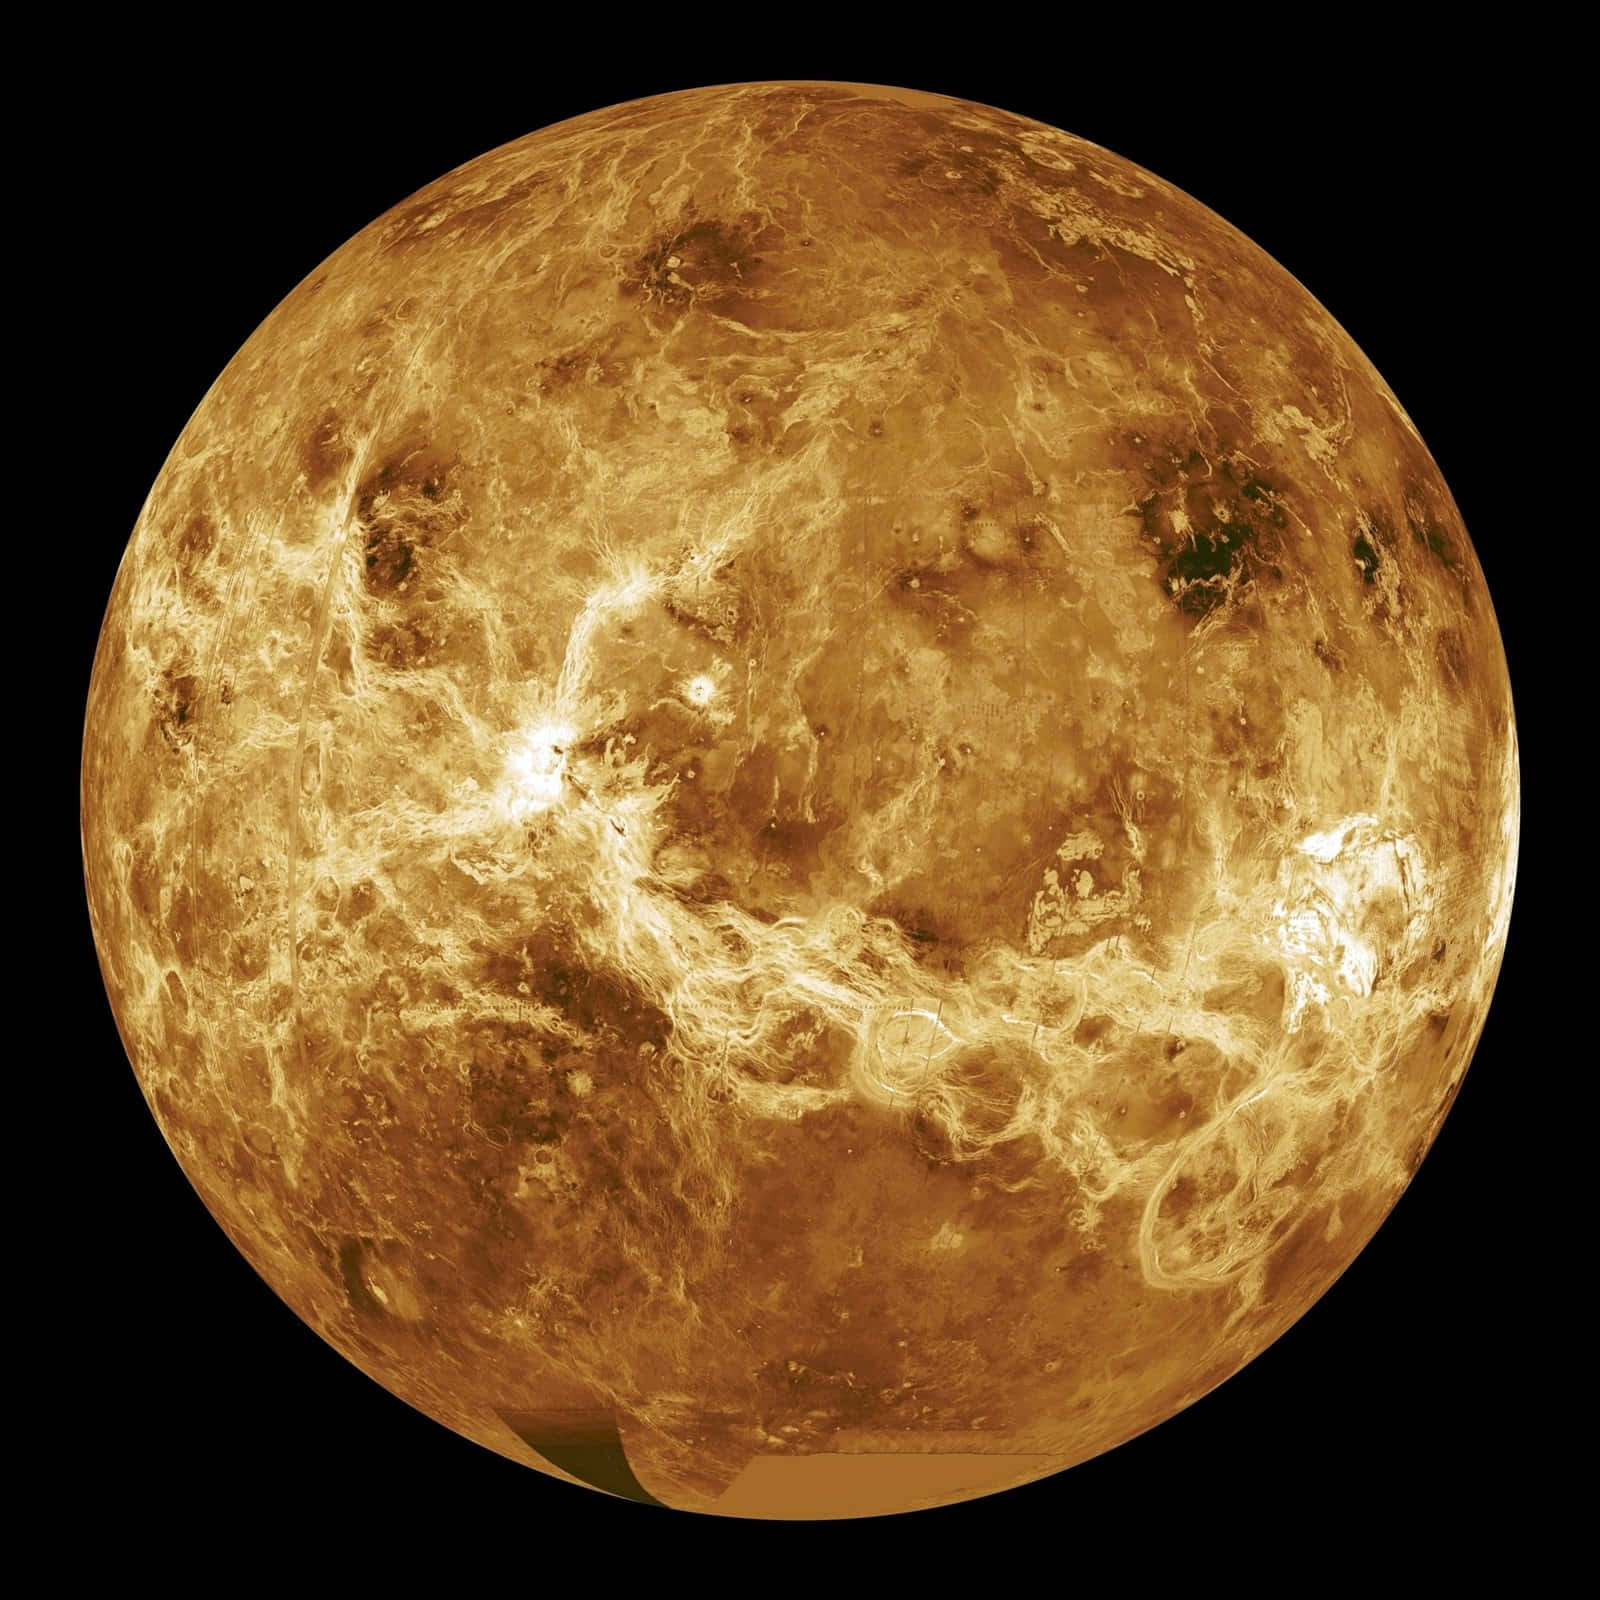 An image of Earth's sister planet, Venus